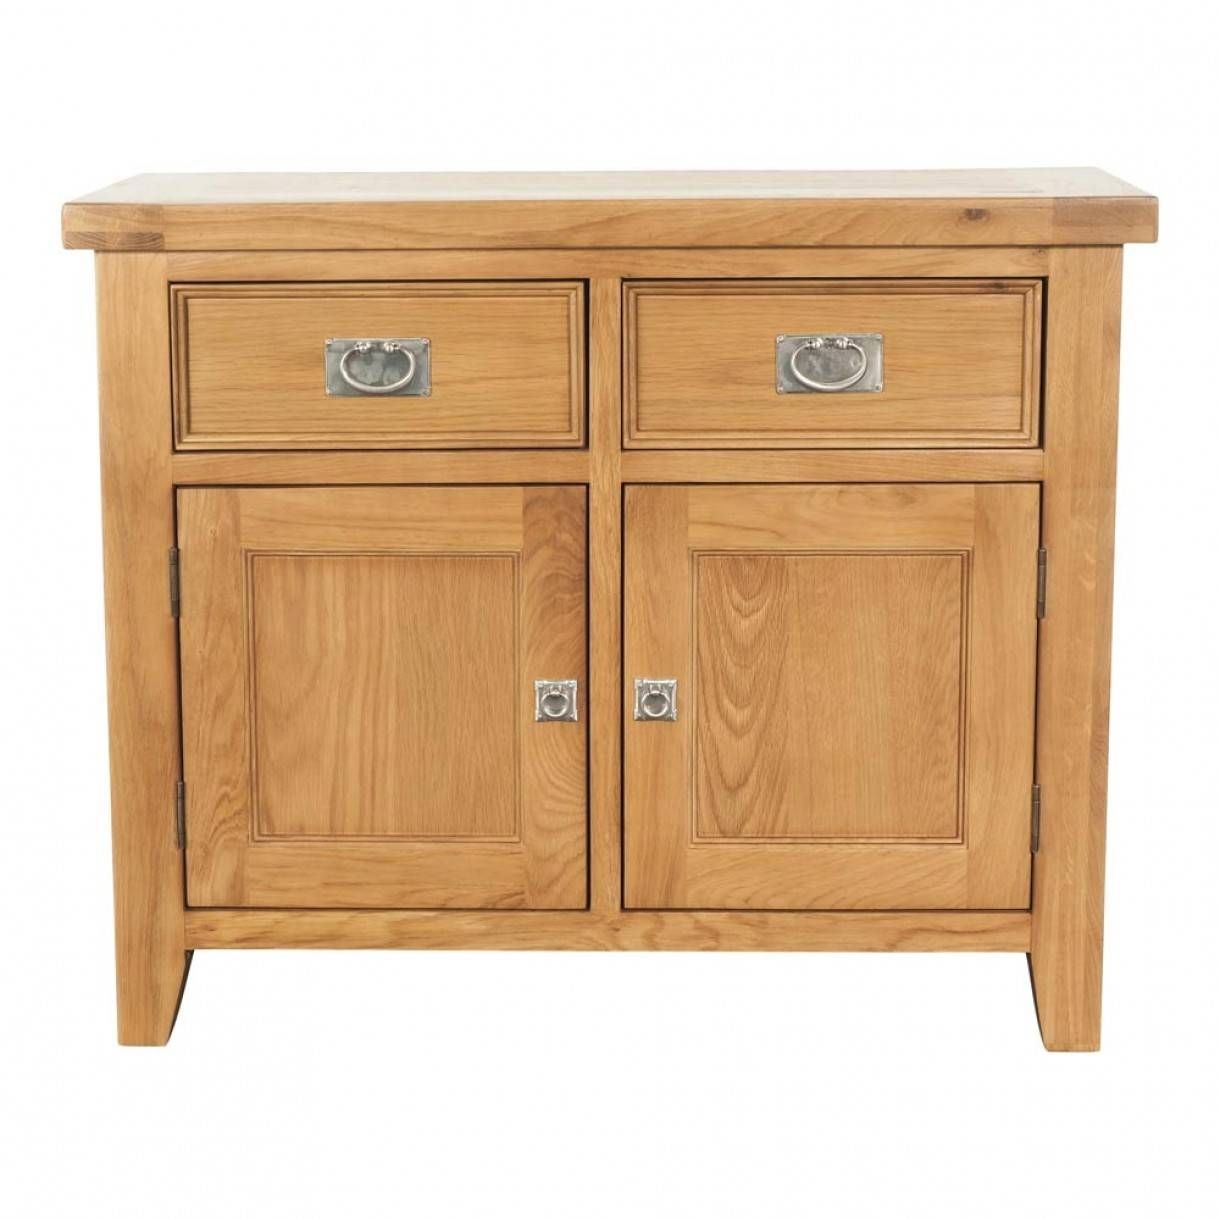 Buy Buffets And Sideboards Online | Dining | Early Settler Furniture Regarding Small Sideboards For Sale (View 18 of 30)